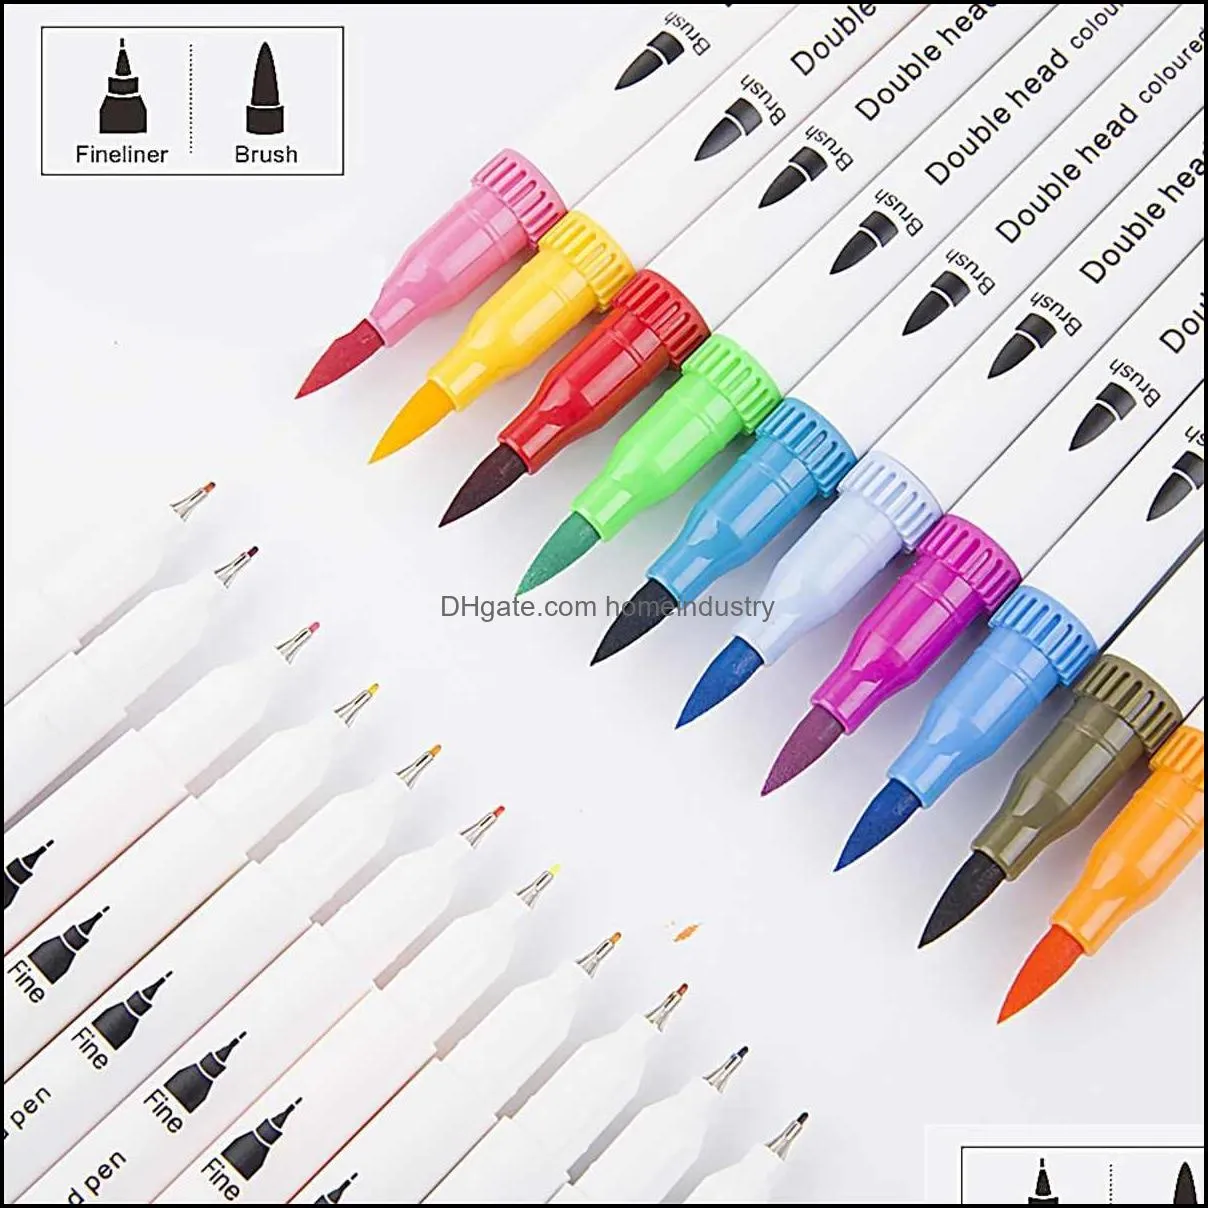 100 colors dual tip brush color pen art markers pen touchfive copic markers pen watercolor fineliner drawing painting stationery